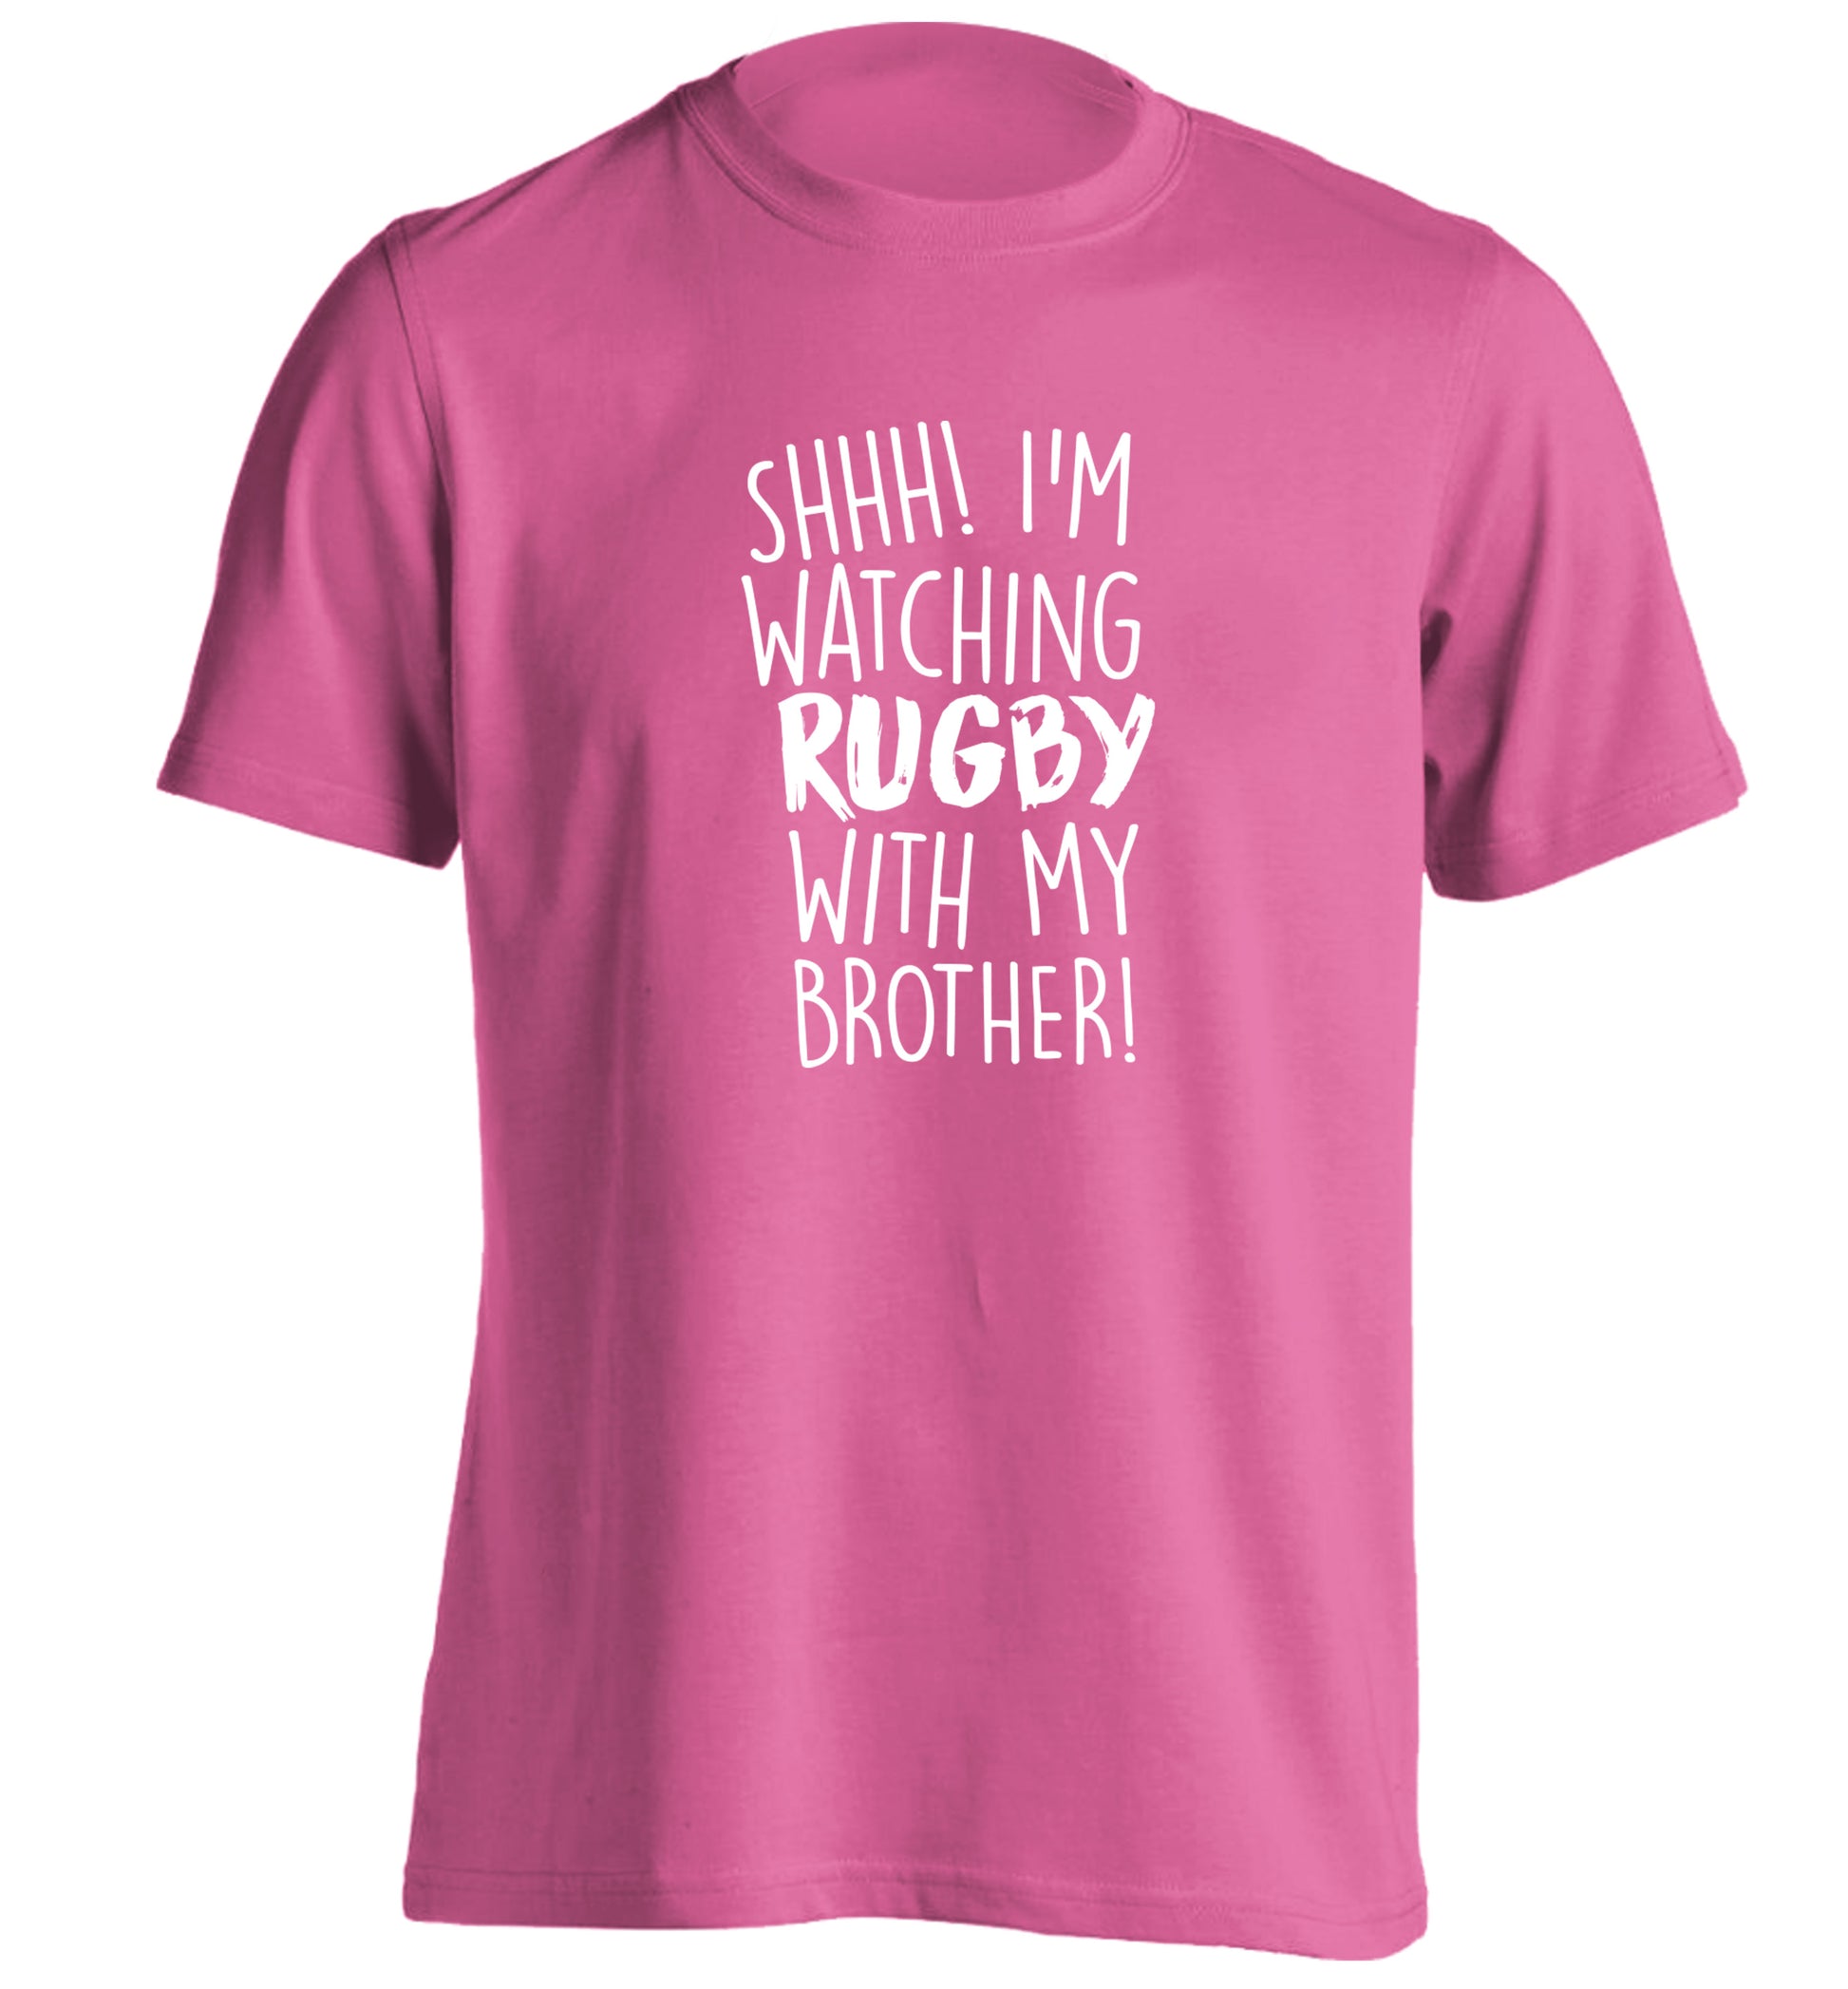 Shh... I'm watching rugby with my brother adults unisex pink Tshirt 2XL